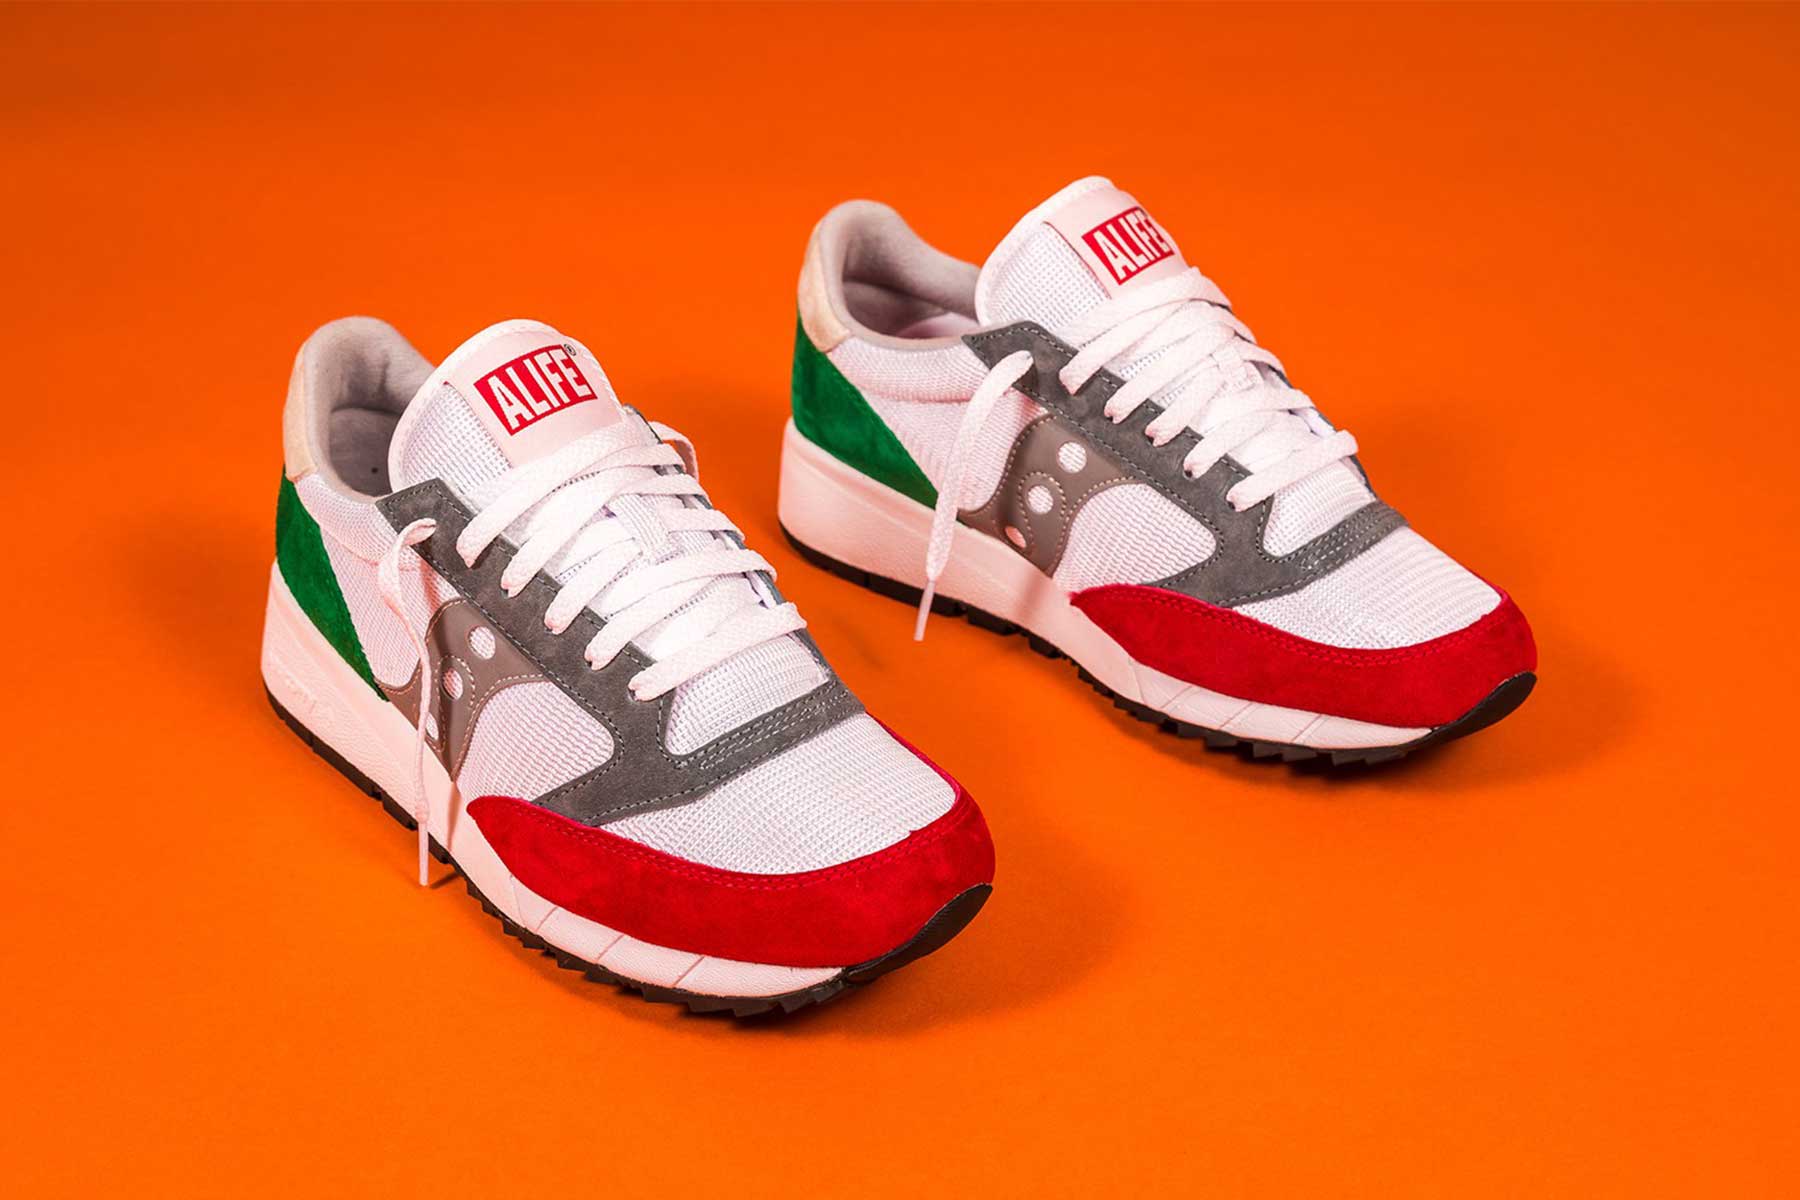 ALIFE has partnered with Saucony to release updated designs on the Jazz ’91. The streetwear brand and Saucony have linked up to present the Jazz ’91 model.